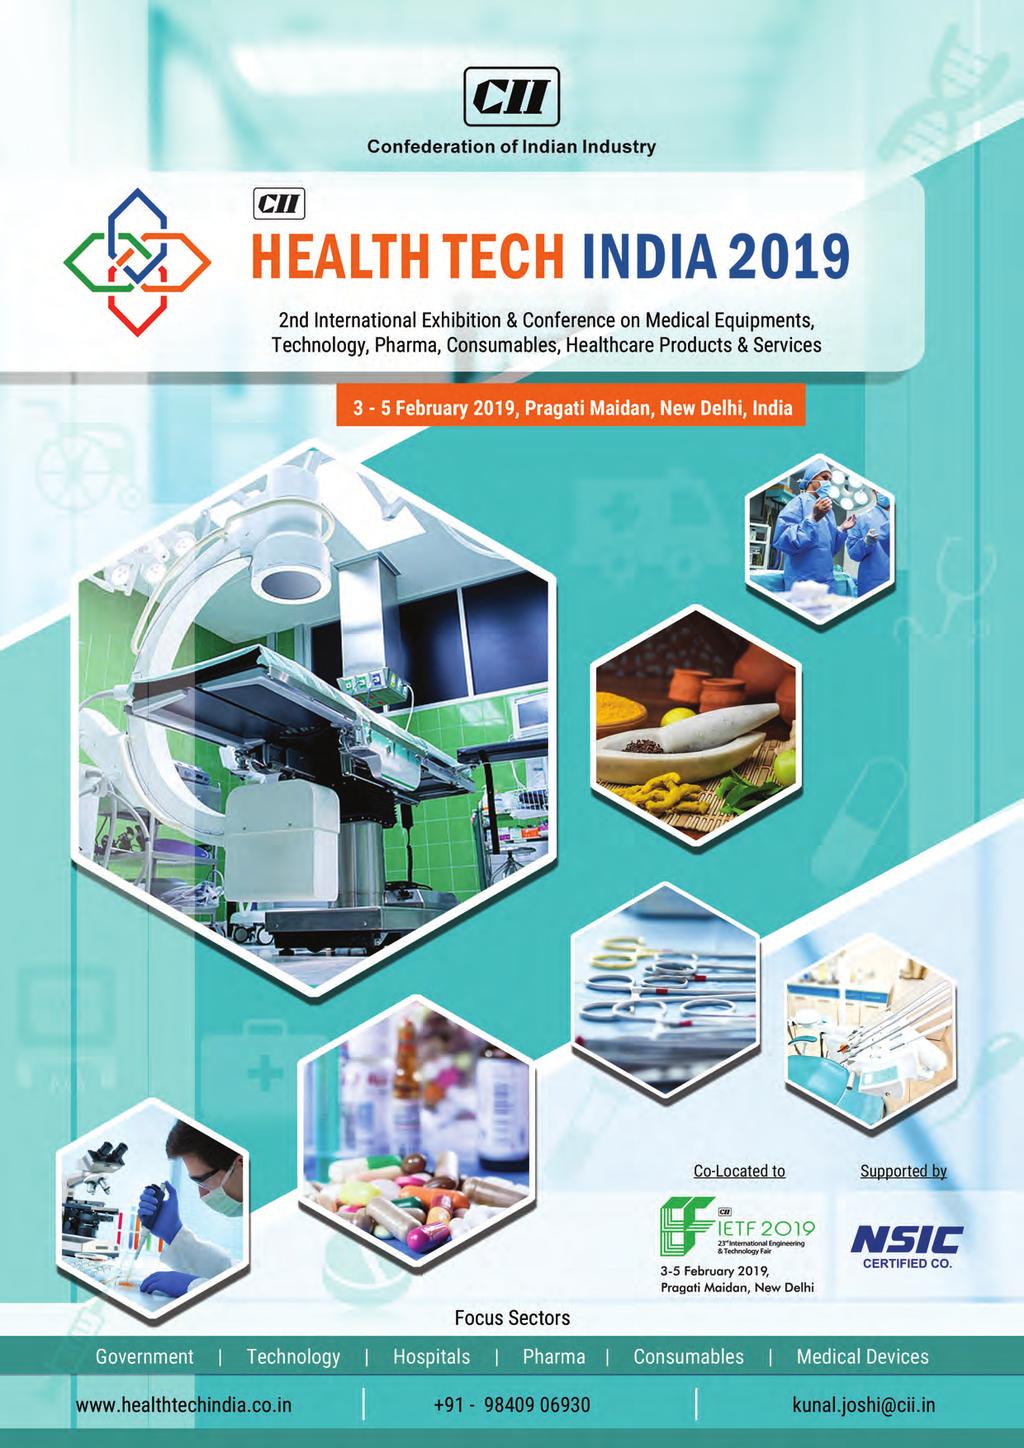 Confederation of Indian Industry iell] HEALTHTECH INDIA 2019 2nd International Exhibition & Conference on Medical Equipments, Technology, Pharma, Consumables, Healthcare Products & Services